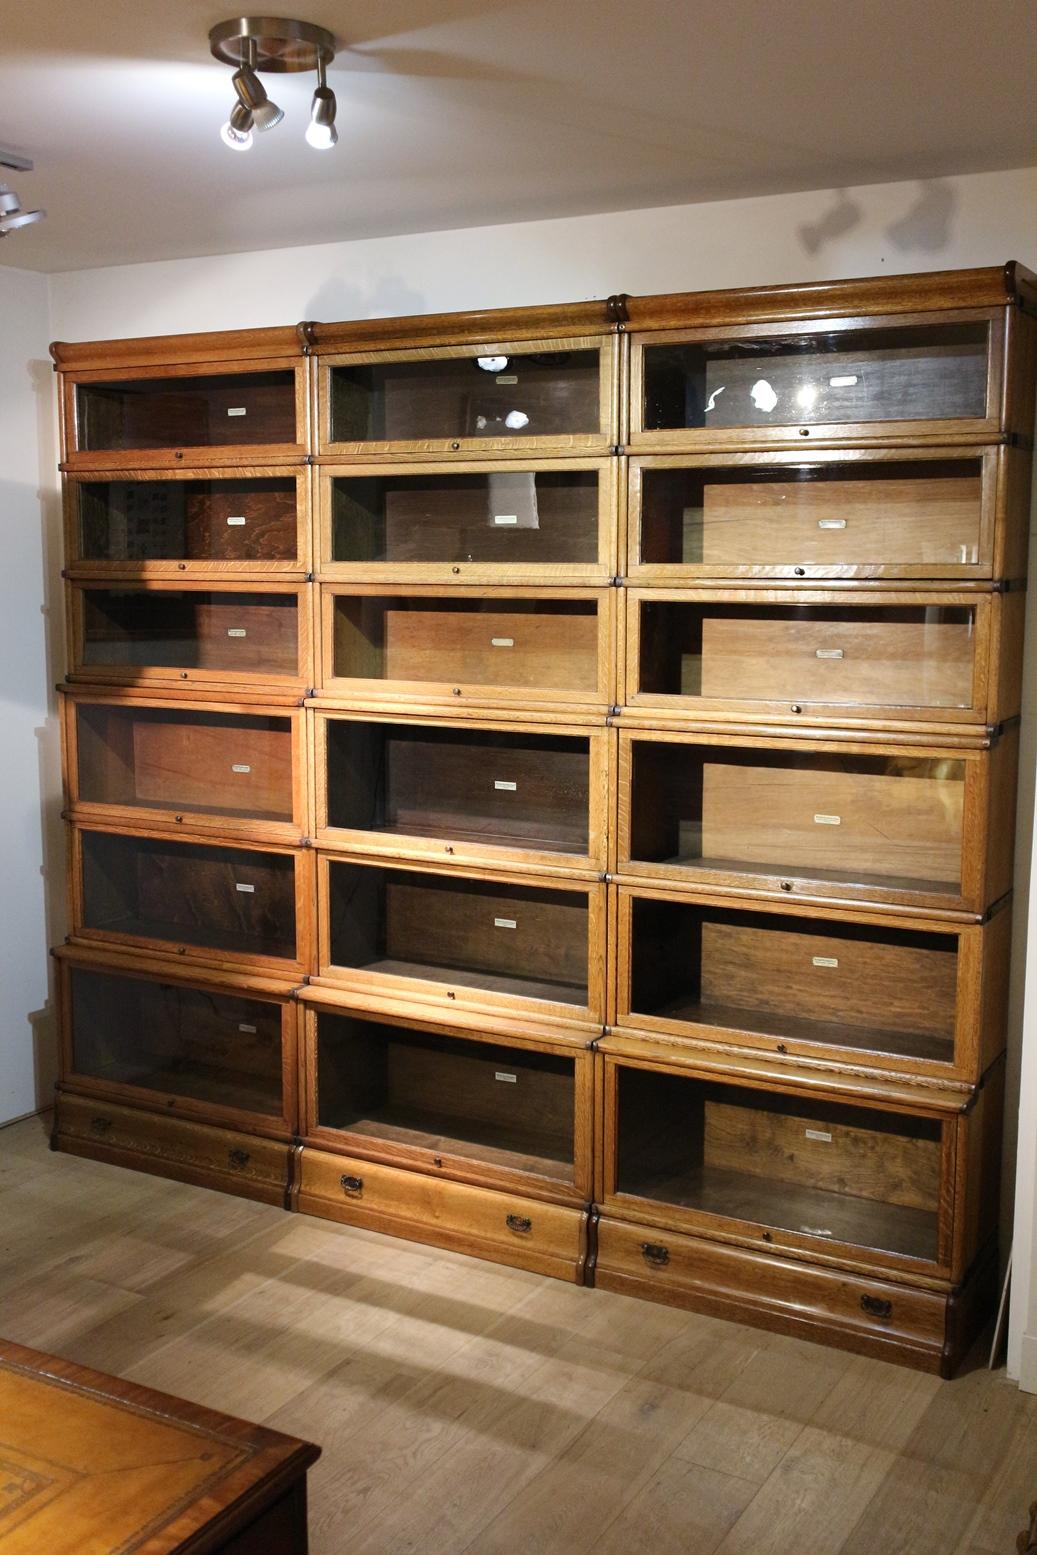 Impressive antique oak Globe Wernicke bookcase. In perfect condition The cabinet consists of 18 stackable parts. Jumps twice in depth. The so-called waterfall arrangement. There are drawers in the plinths. This is the most appreciated